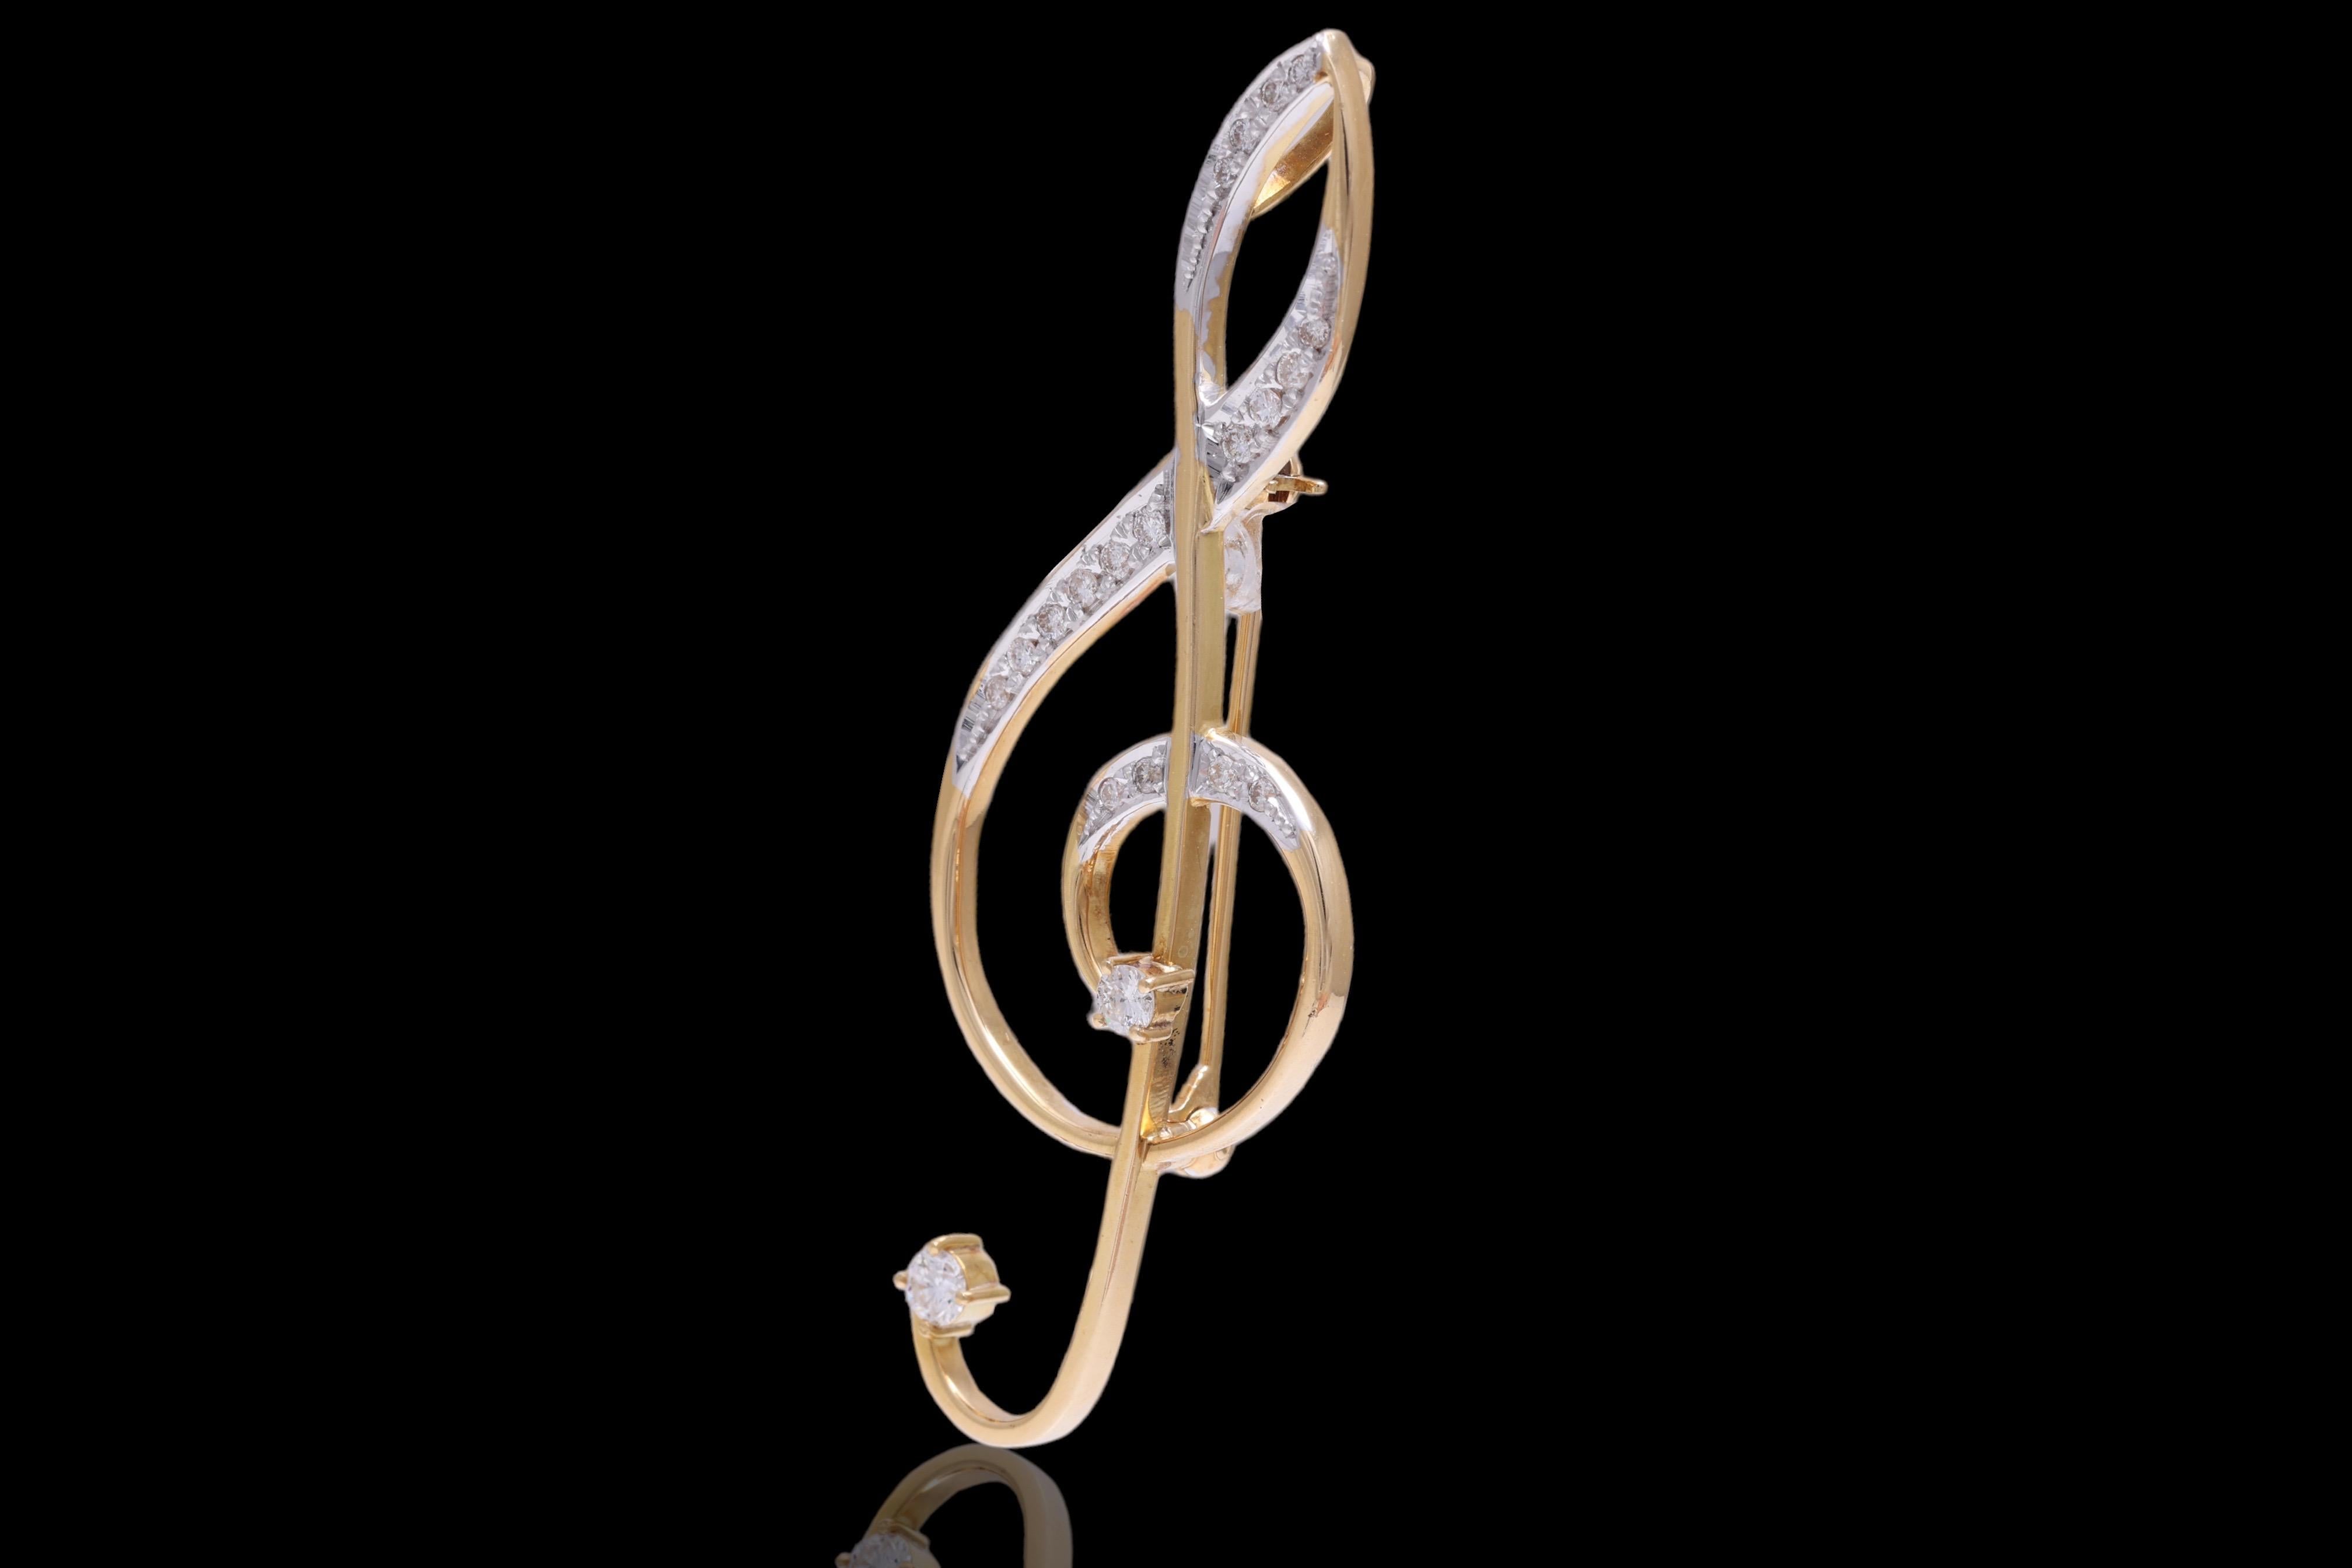 Beautiful 18 kt. yellow gold Brooch / Pendent-Hanger with 0.48 ct. diamonds in the shape of a music note 

Can be worn as a Brooch or with adding a chain as  a Pendant !
Completely hand made.

Diamonds : Brilliant cut diamonds, together 0.48